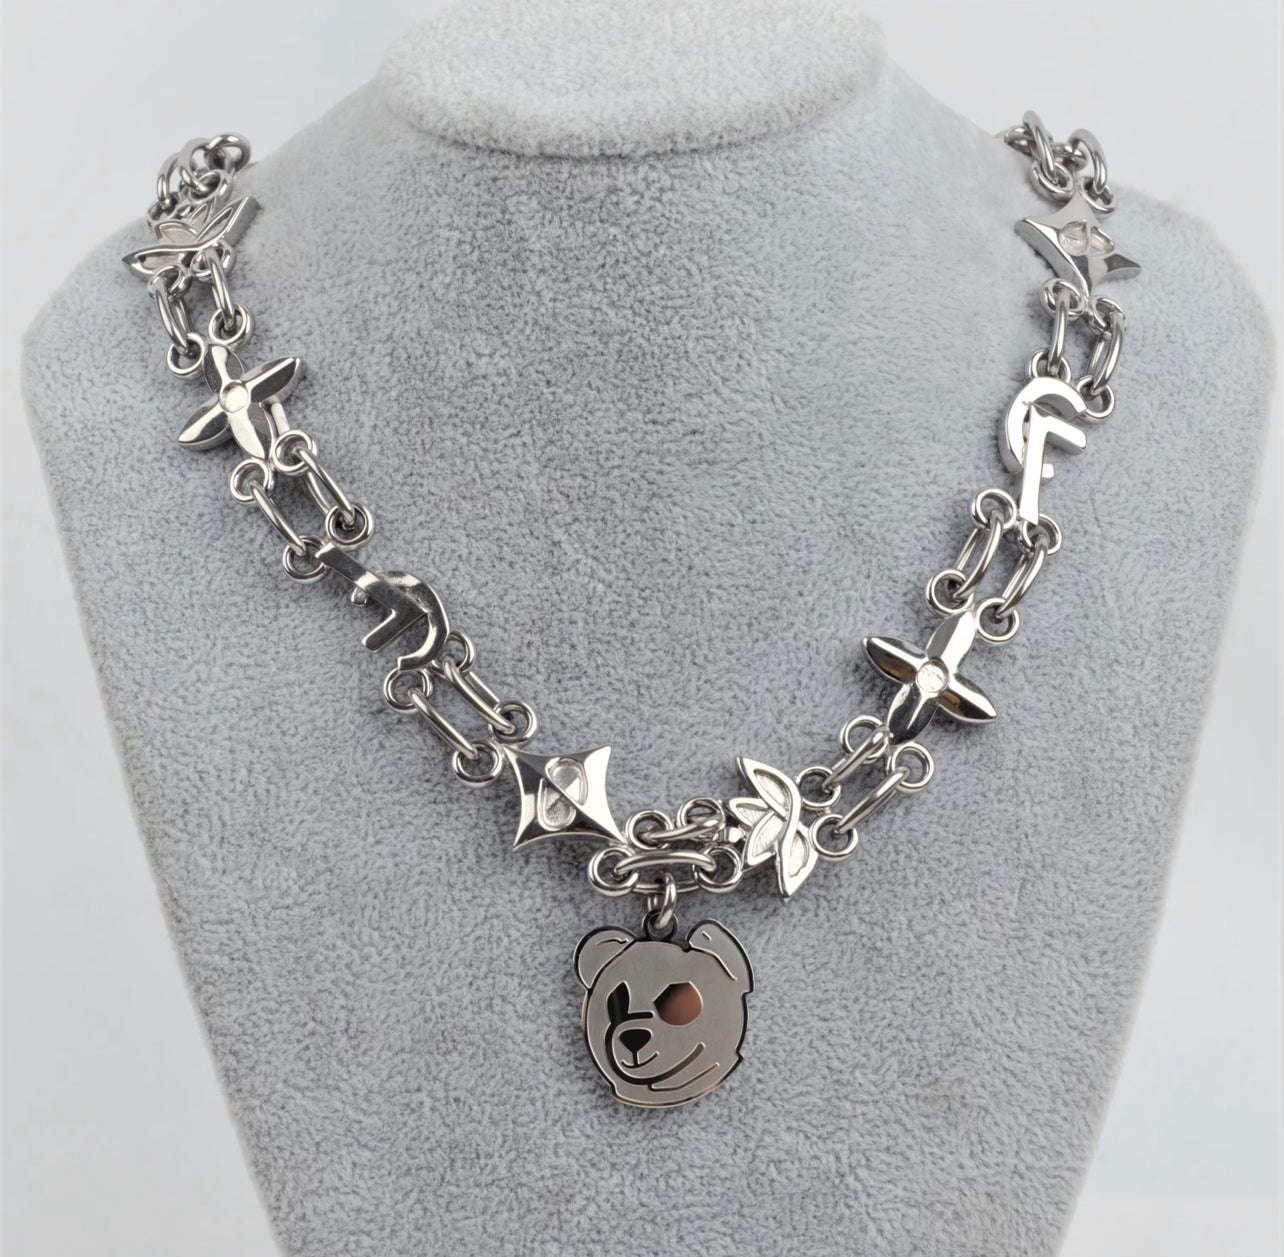 SILVER LEGACY NECKLACE